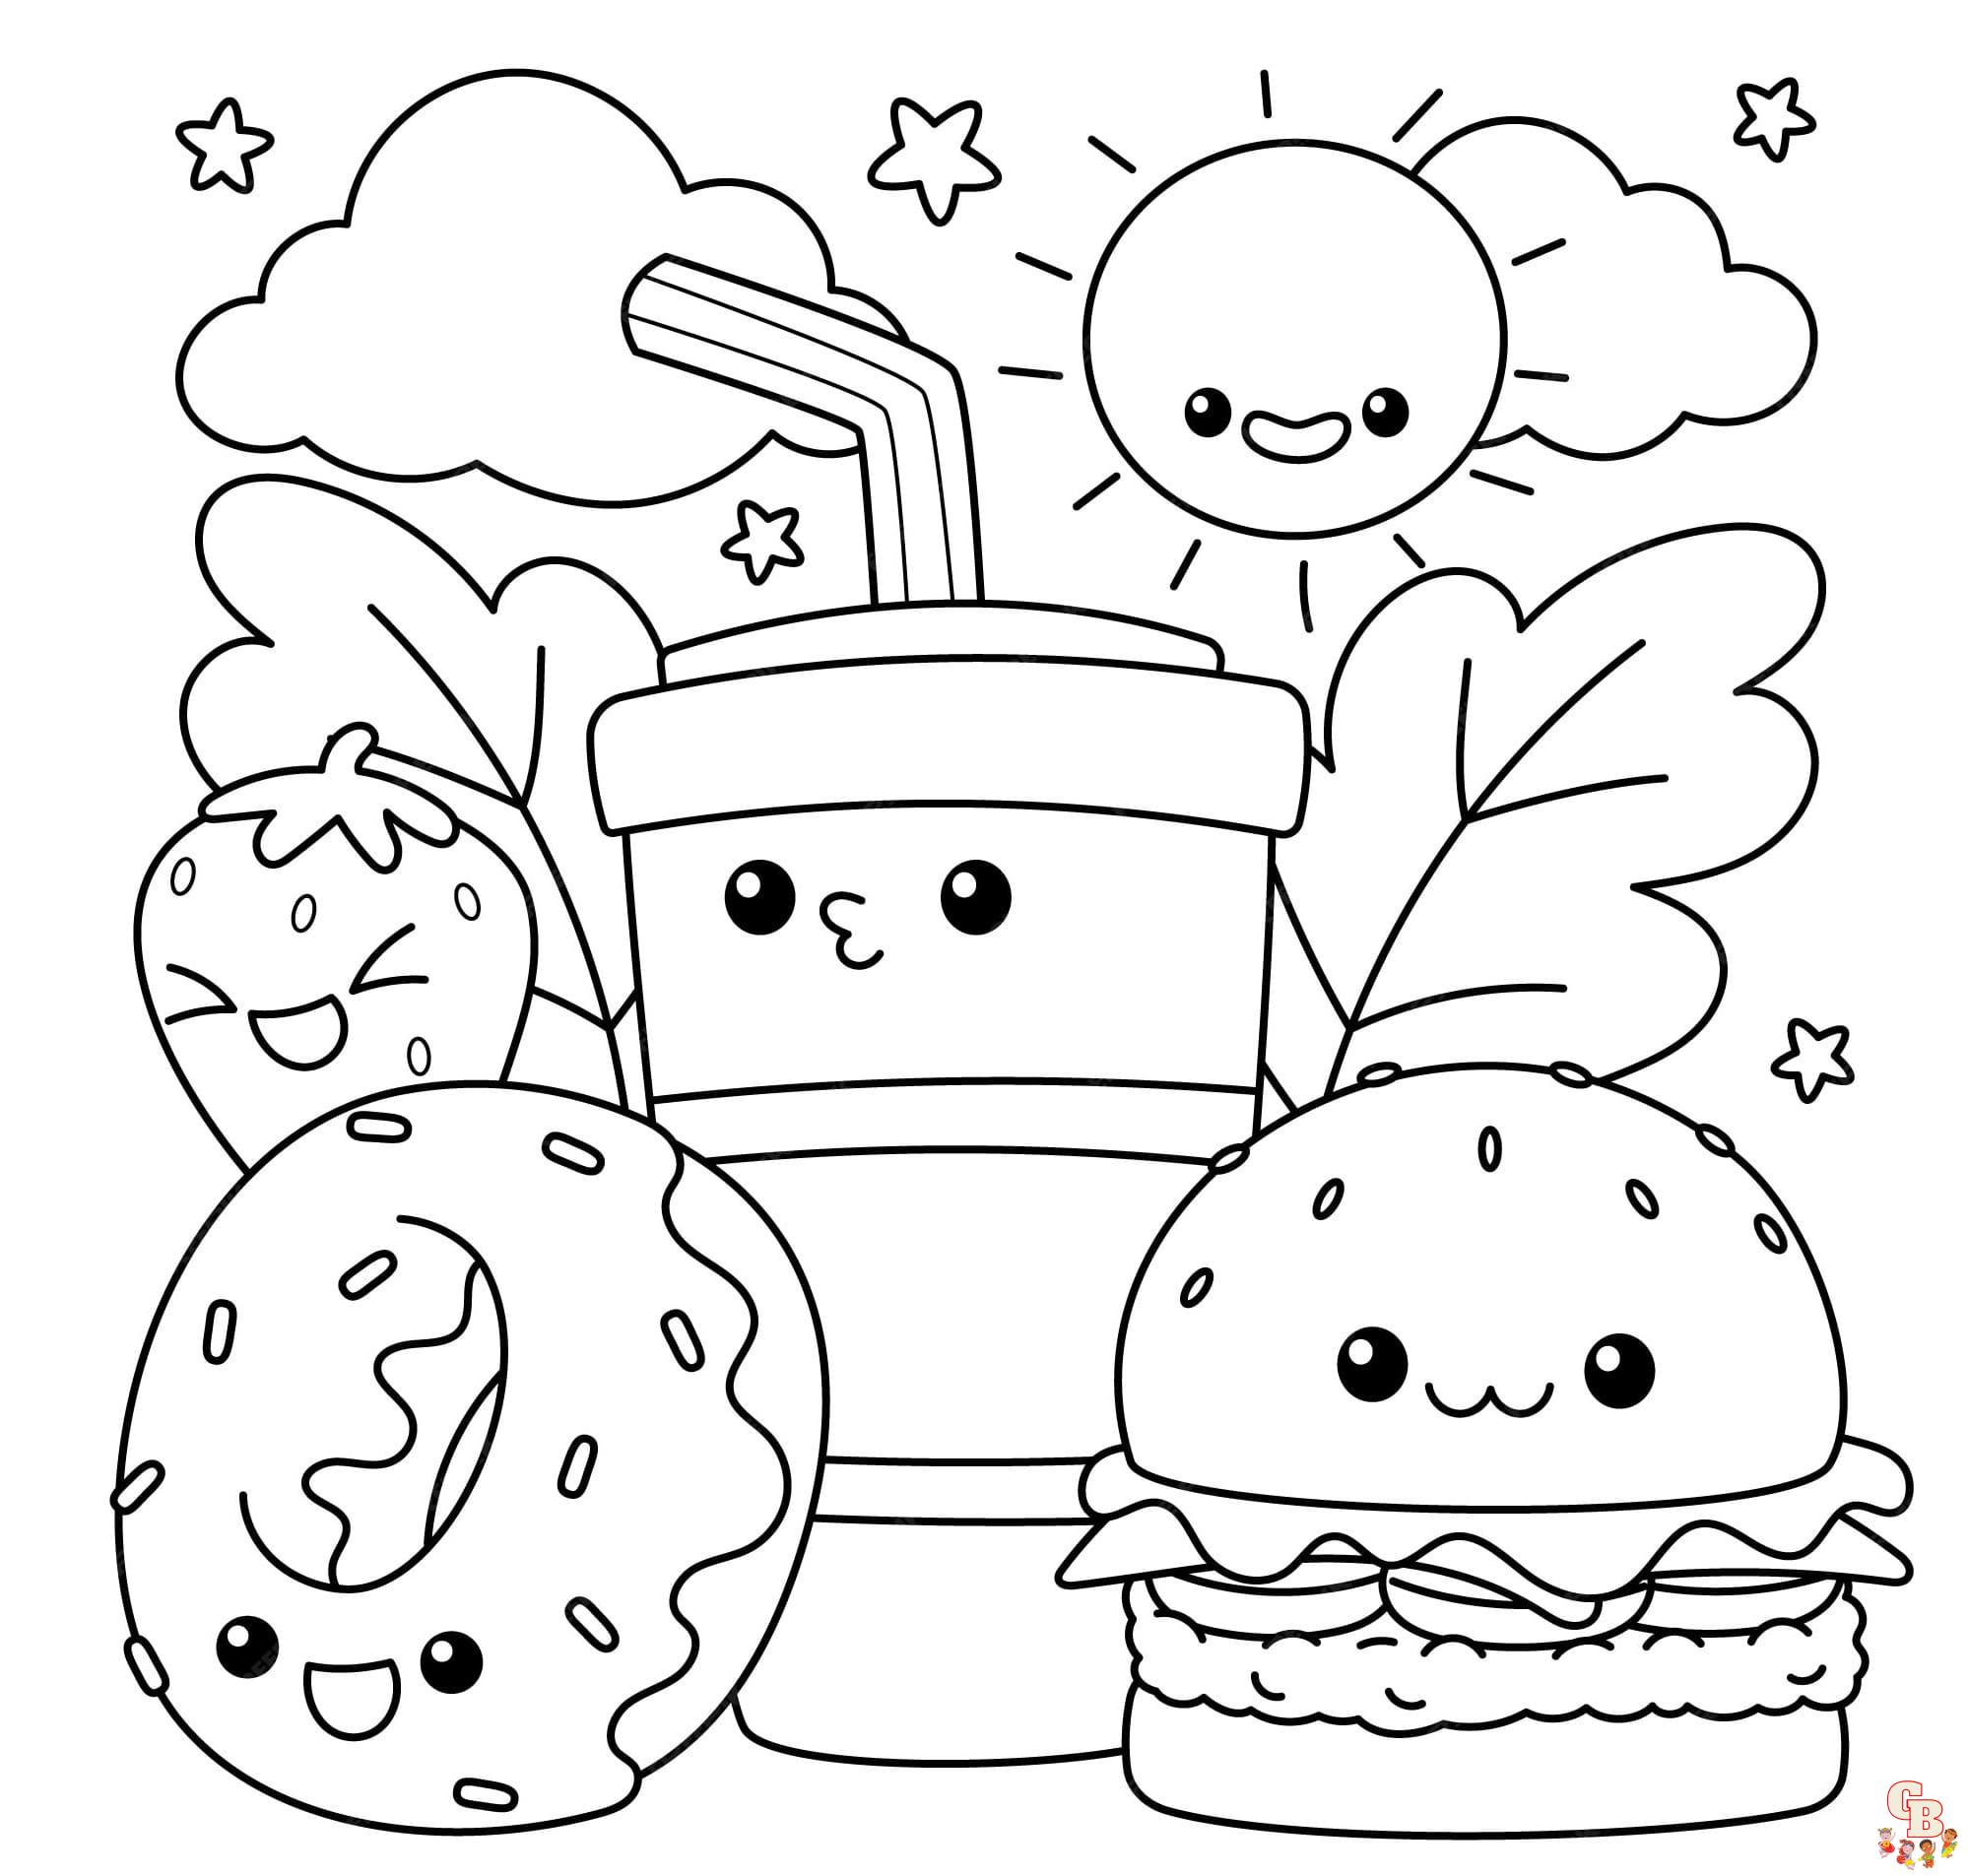 13+ Snack Coloring Page